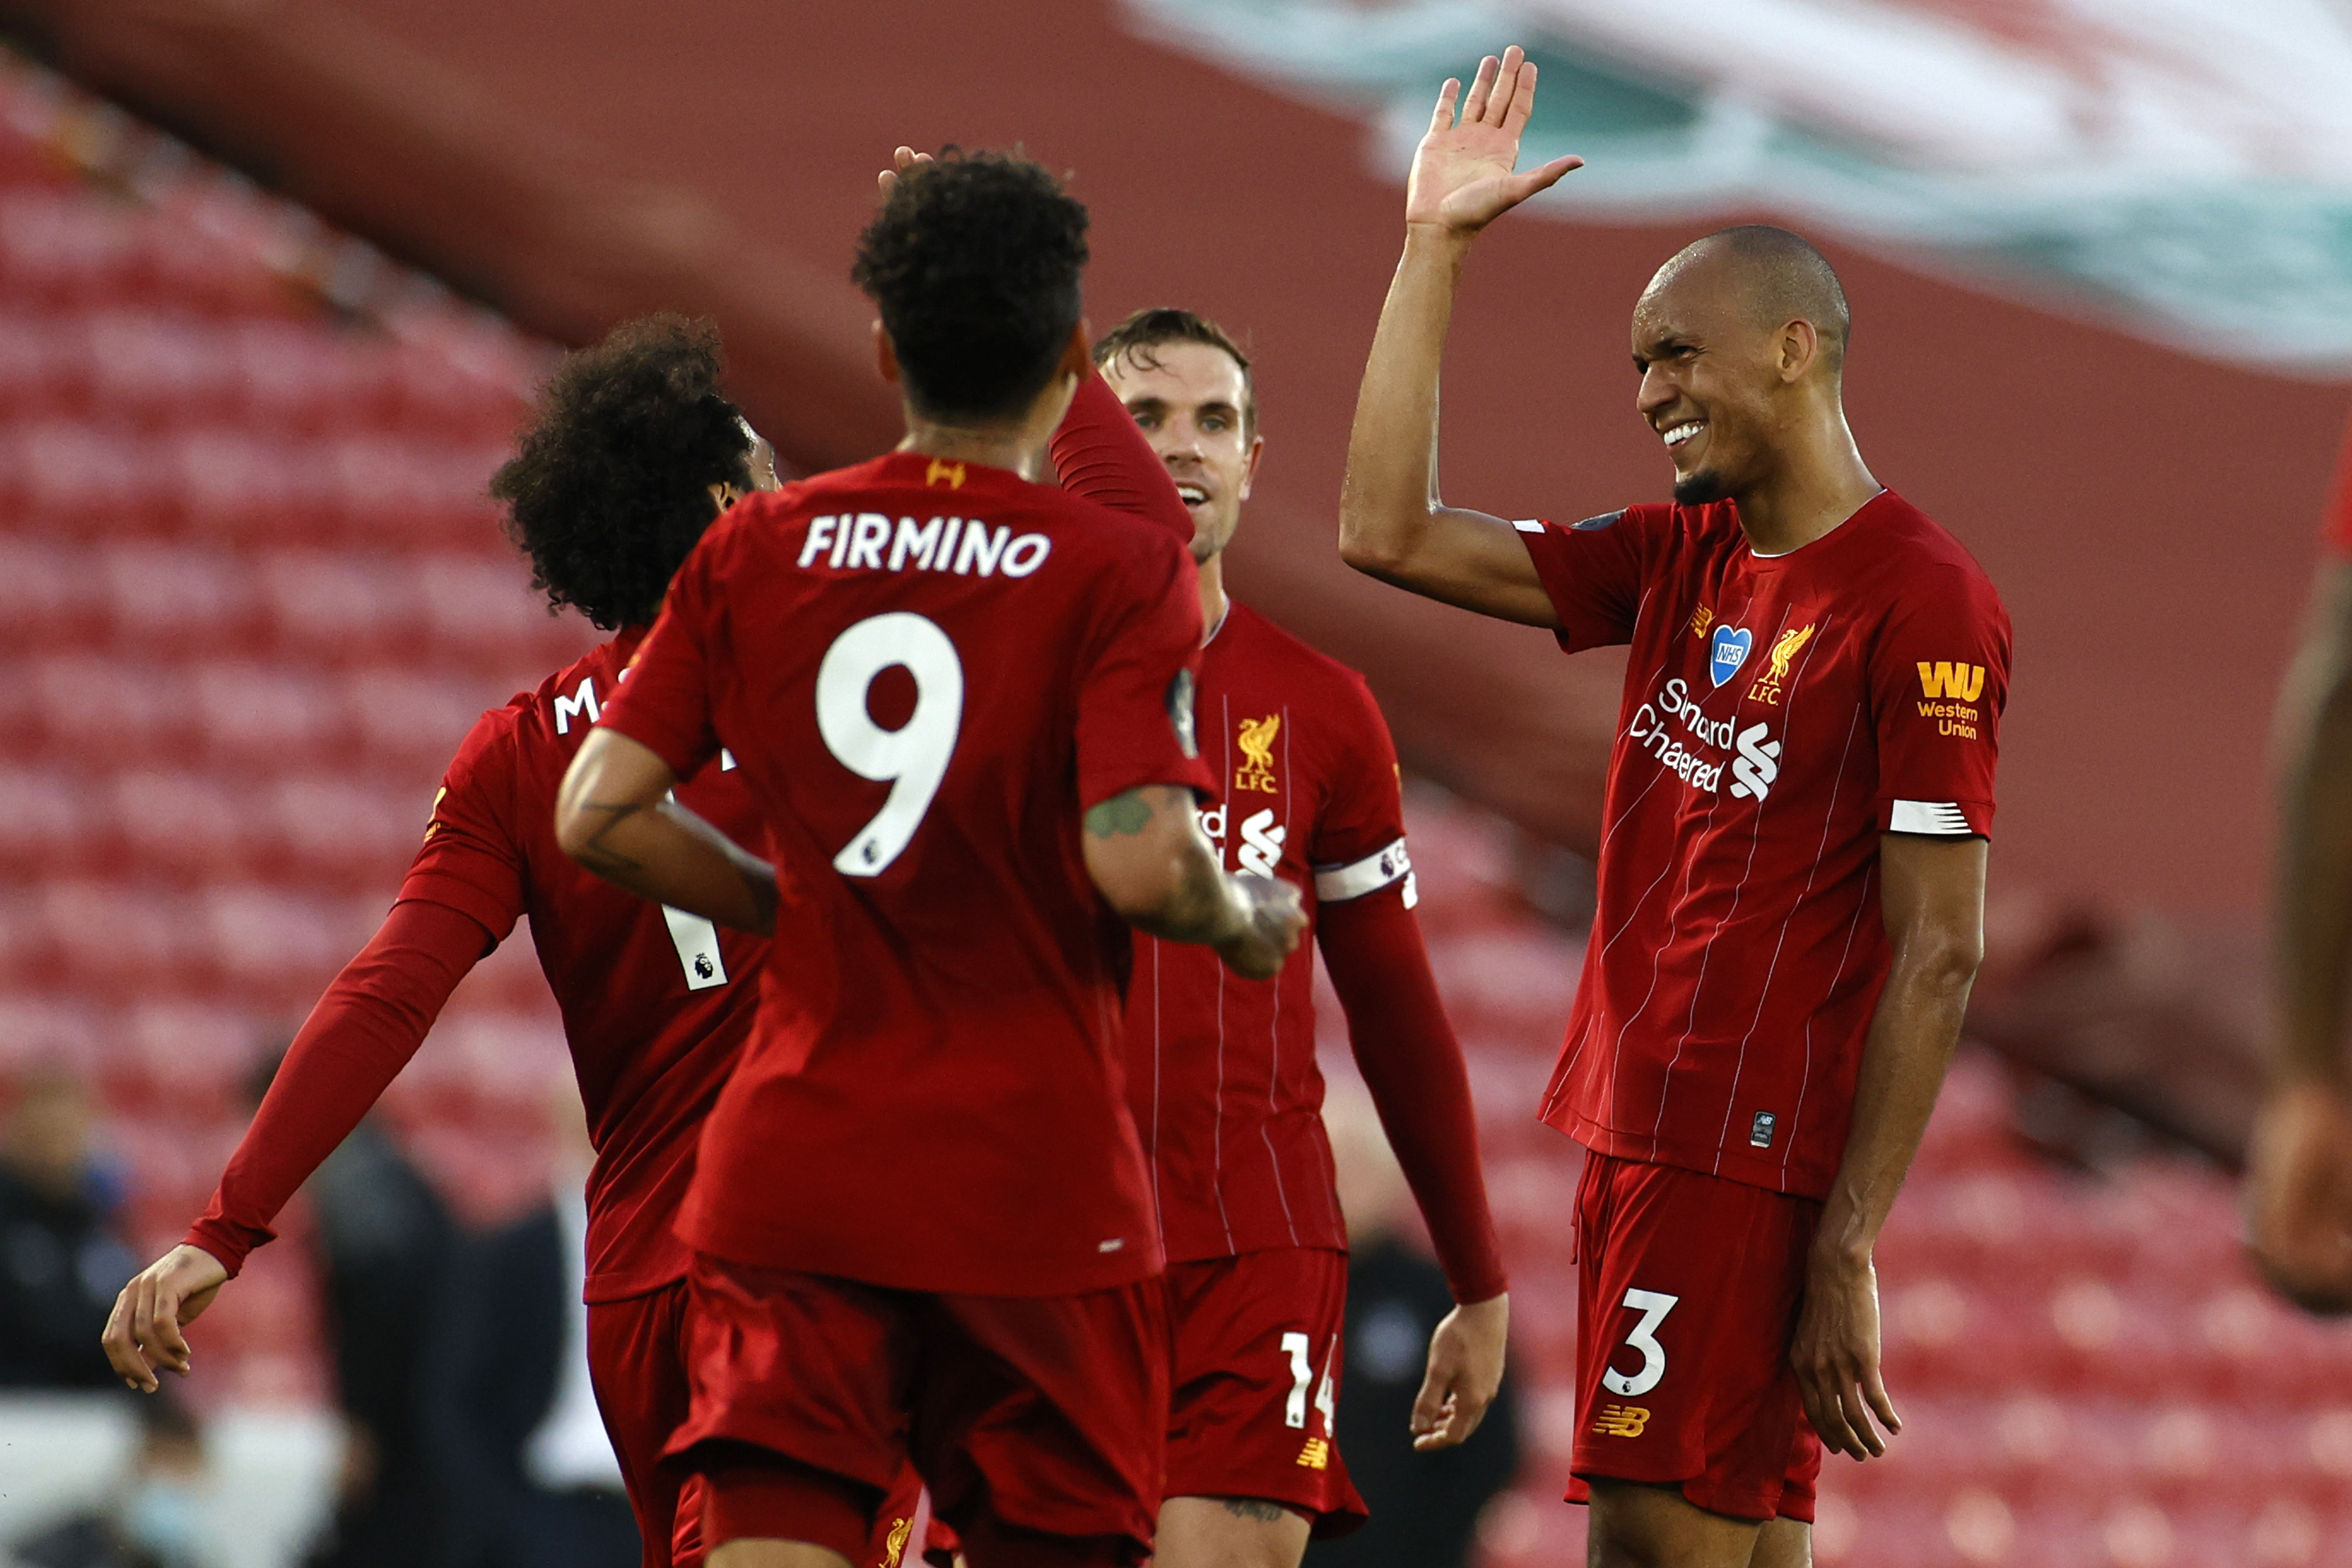 Premier League: Liverpool step away from glory, Manchester United make strong case for top 4